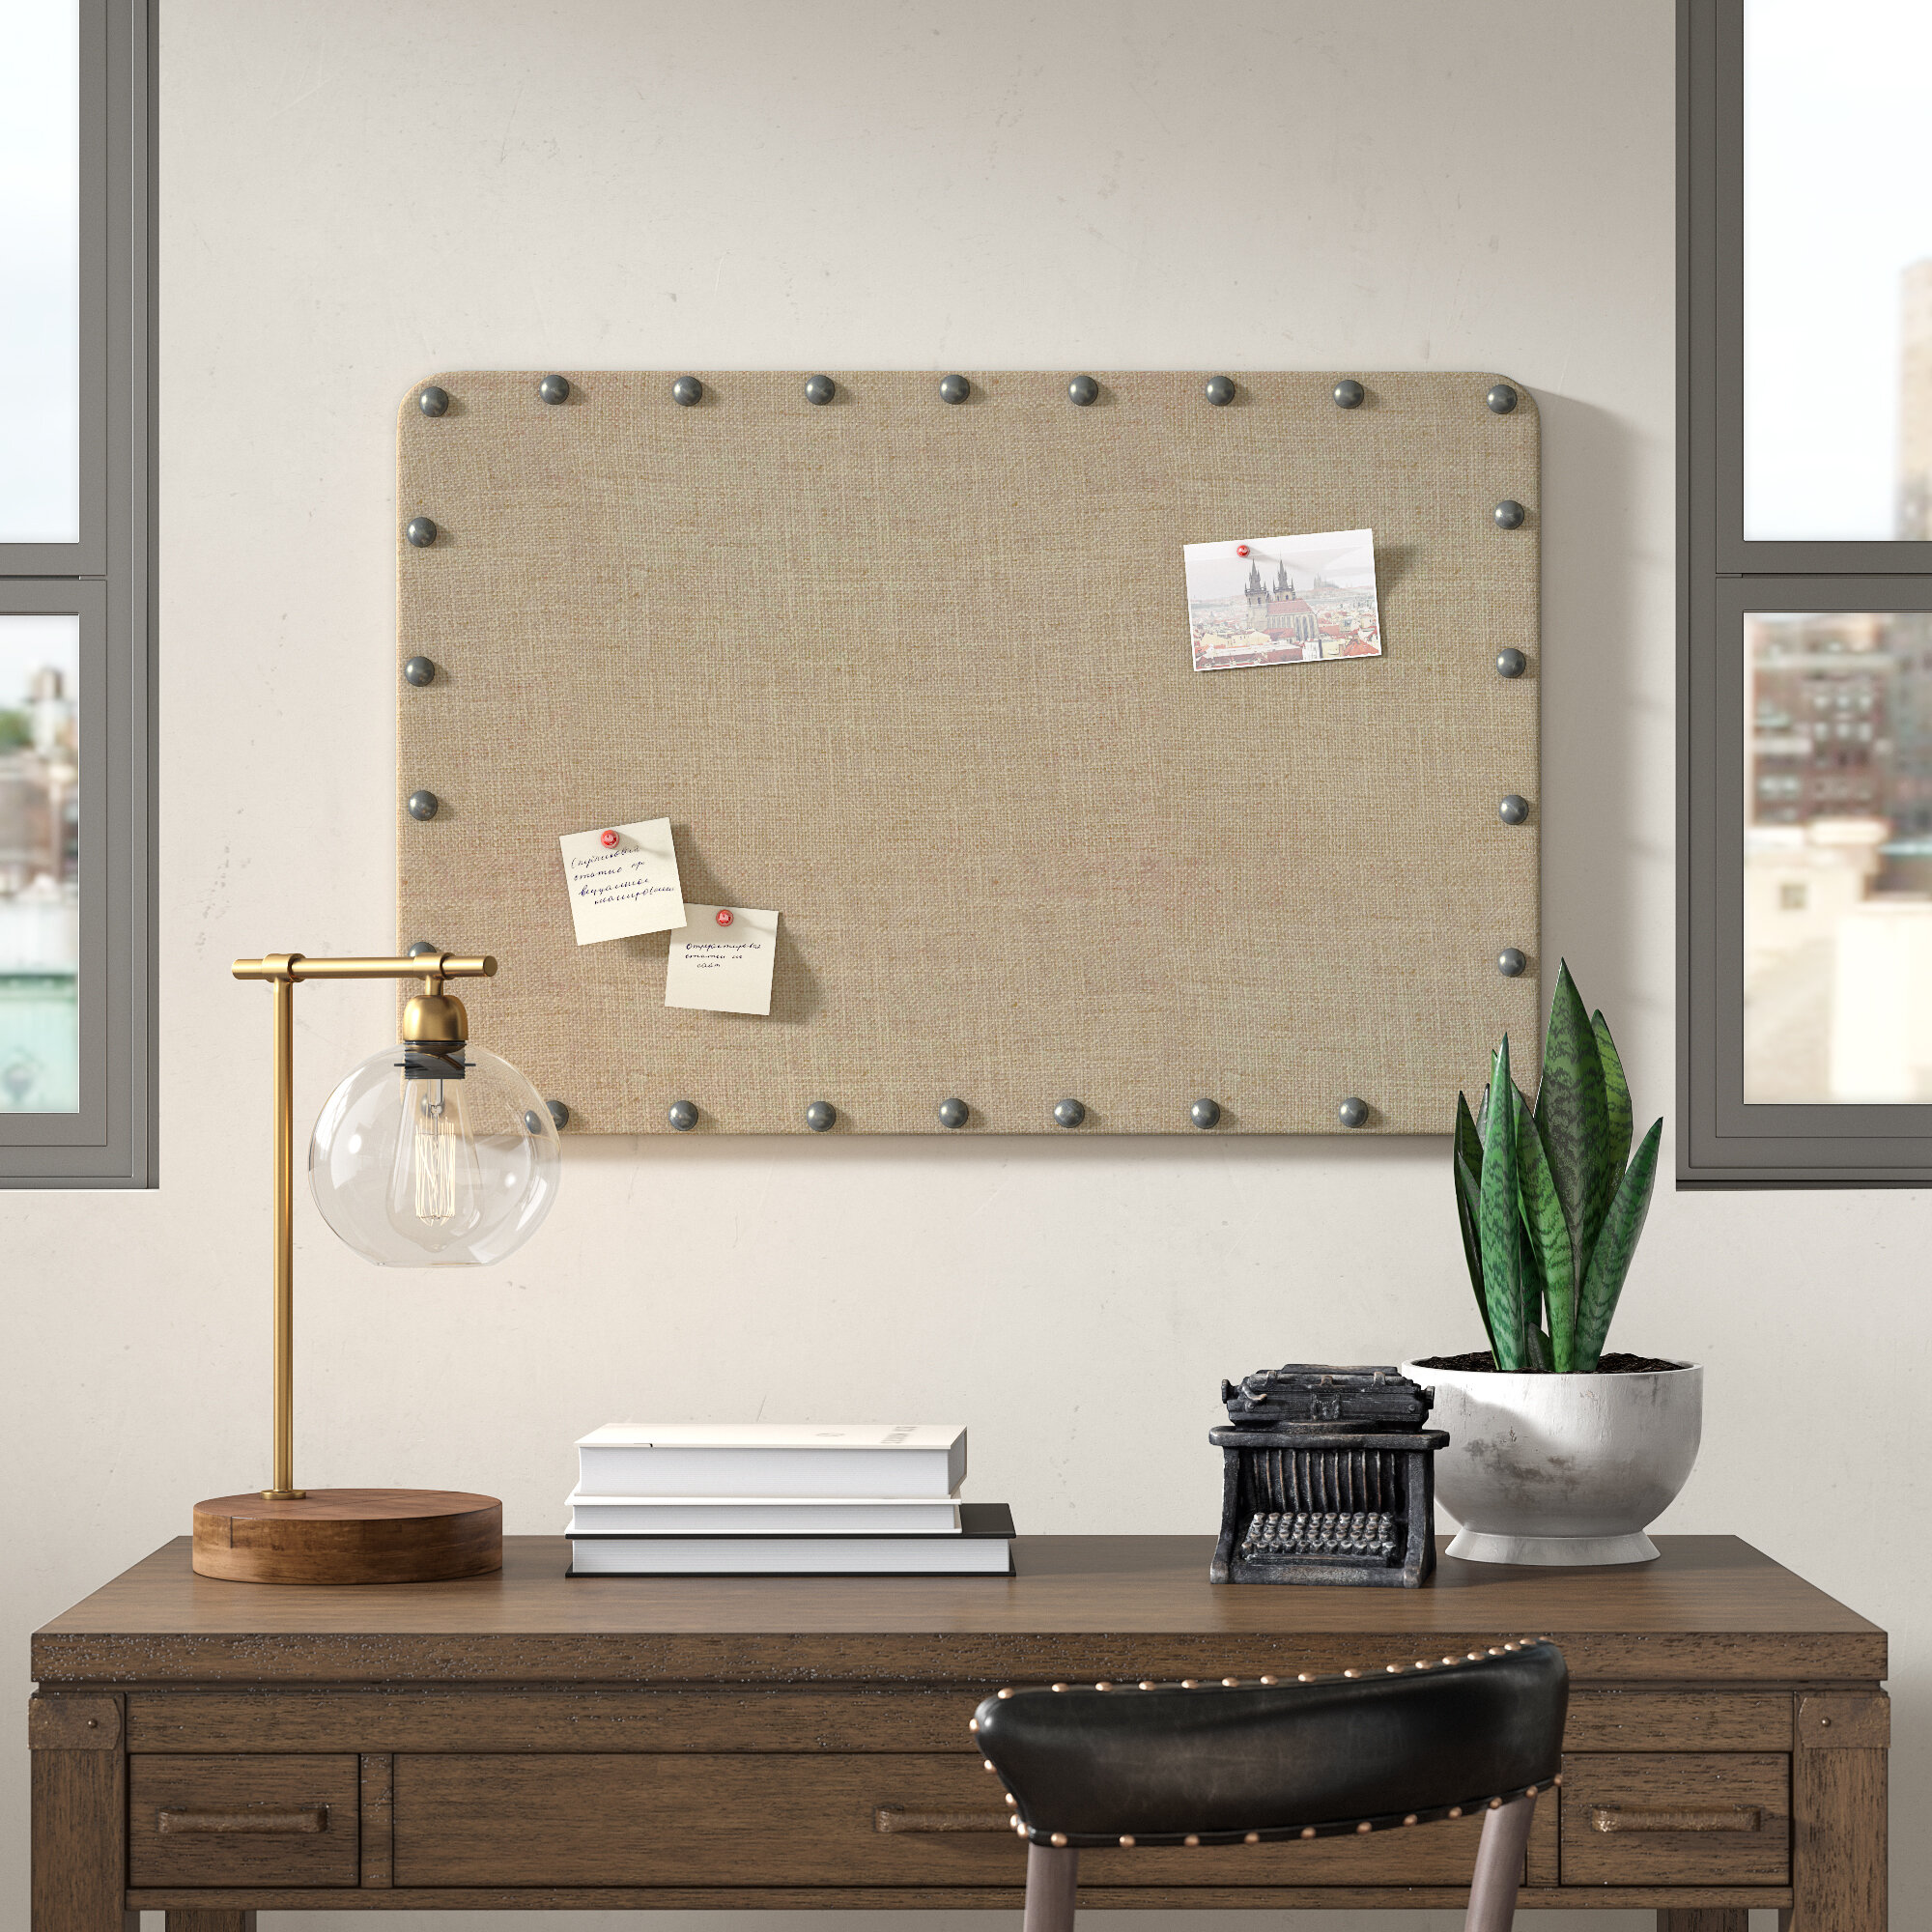 24 x 36 Bulletin Board Aluminum Framed Pin Board Wall Mounted with 12 Pins for Home Cork Board Office and School 